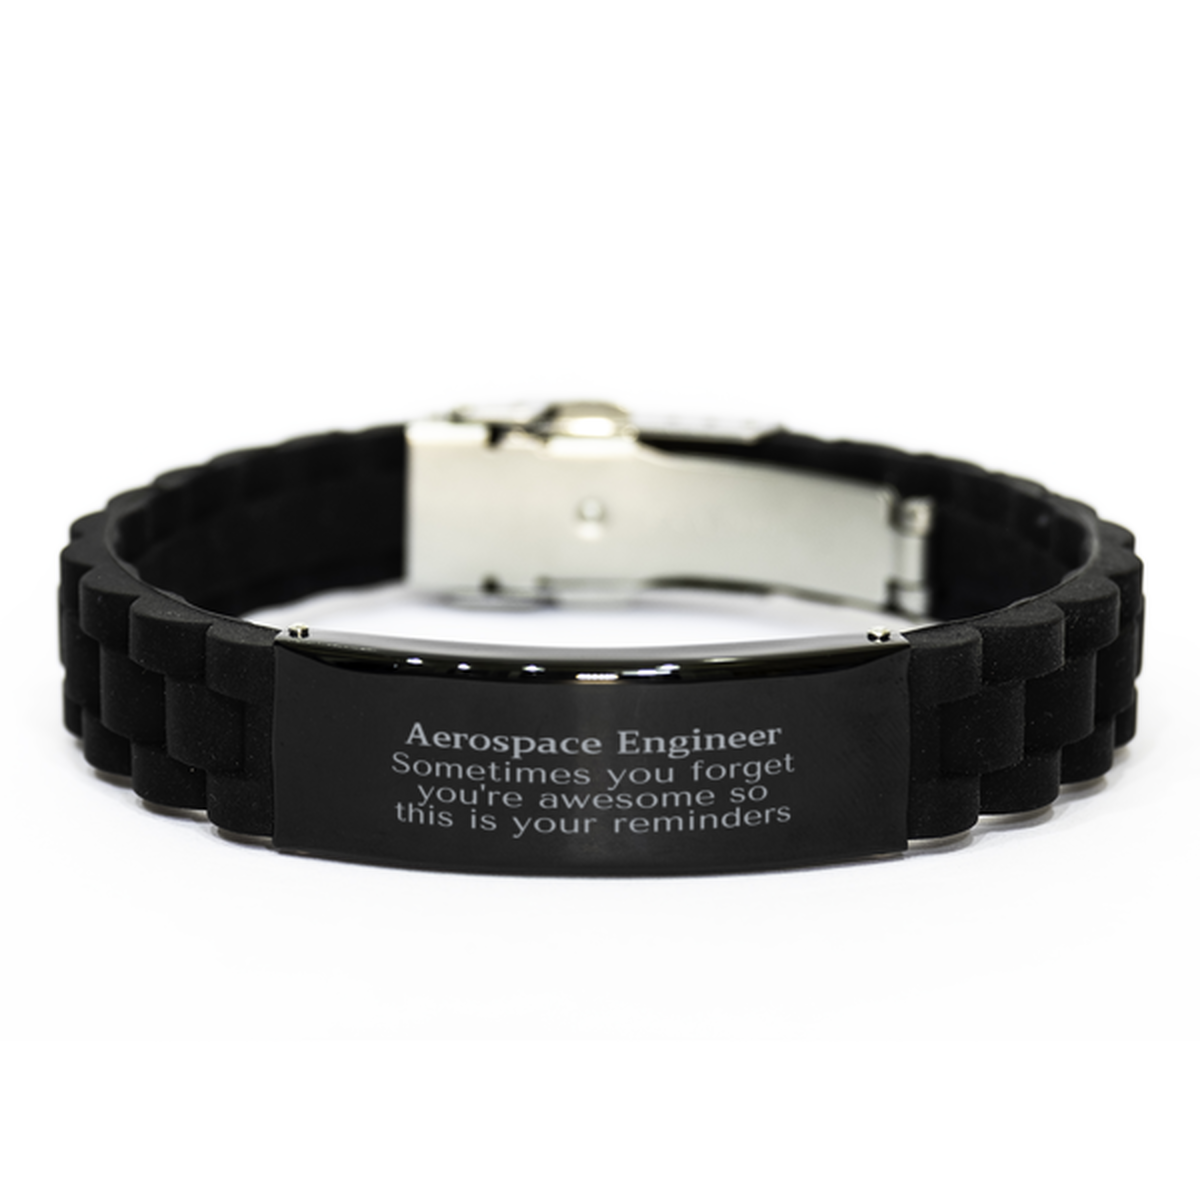 Sentimental Aerospace Engineer Black Glidelock Clasp Bracelet, Aerospace Engineer Sometimes you forget you're awesome so this is your reminders, Graduation Christmas Birthday Gifts for Aerospace Engineer, Men, Women, Coworkers